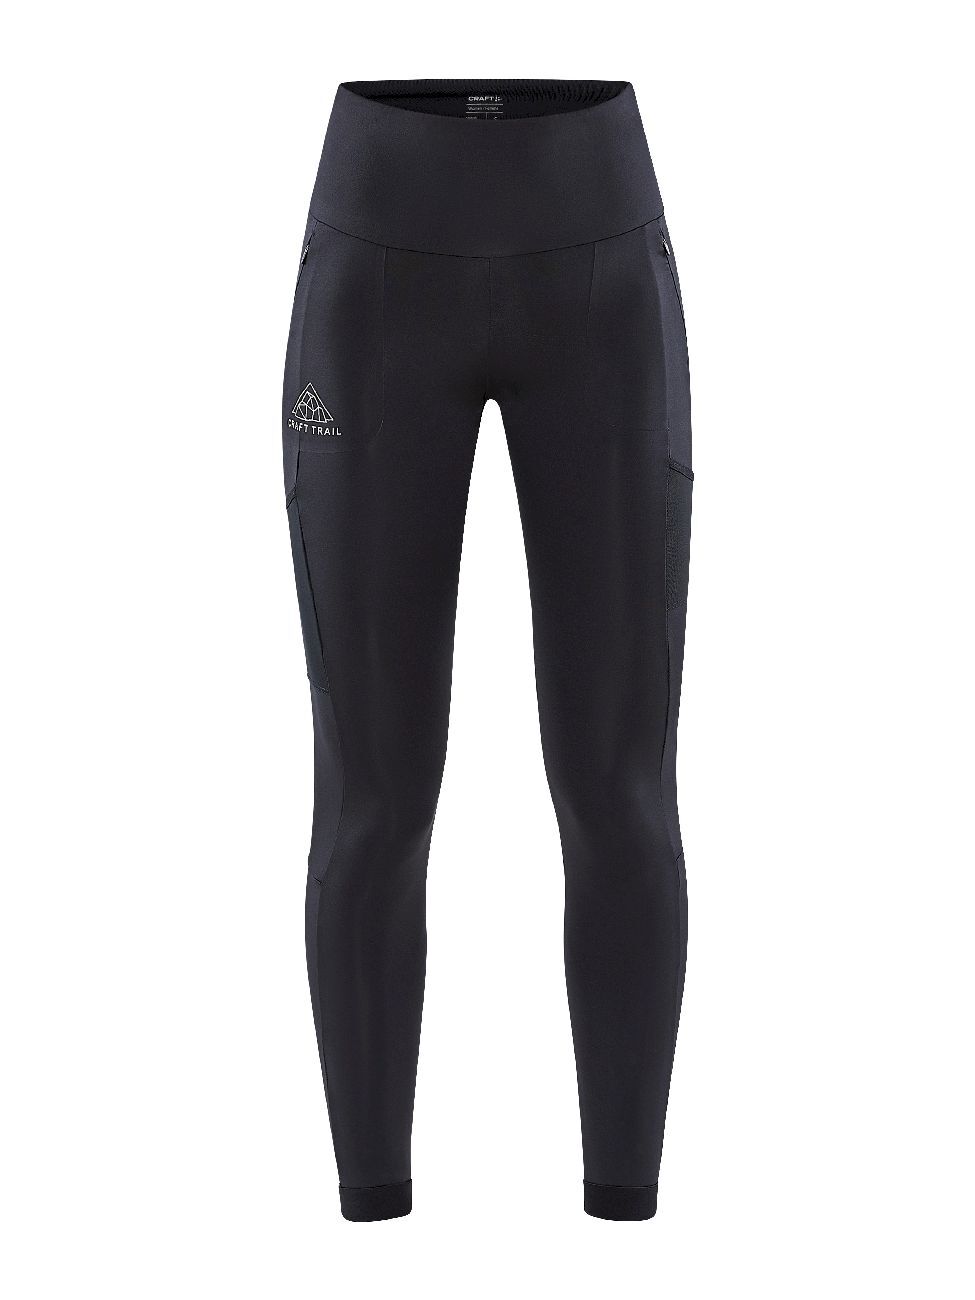 Craft Pro Trail Tights - Collant running femme